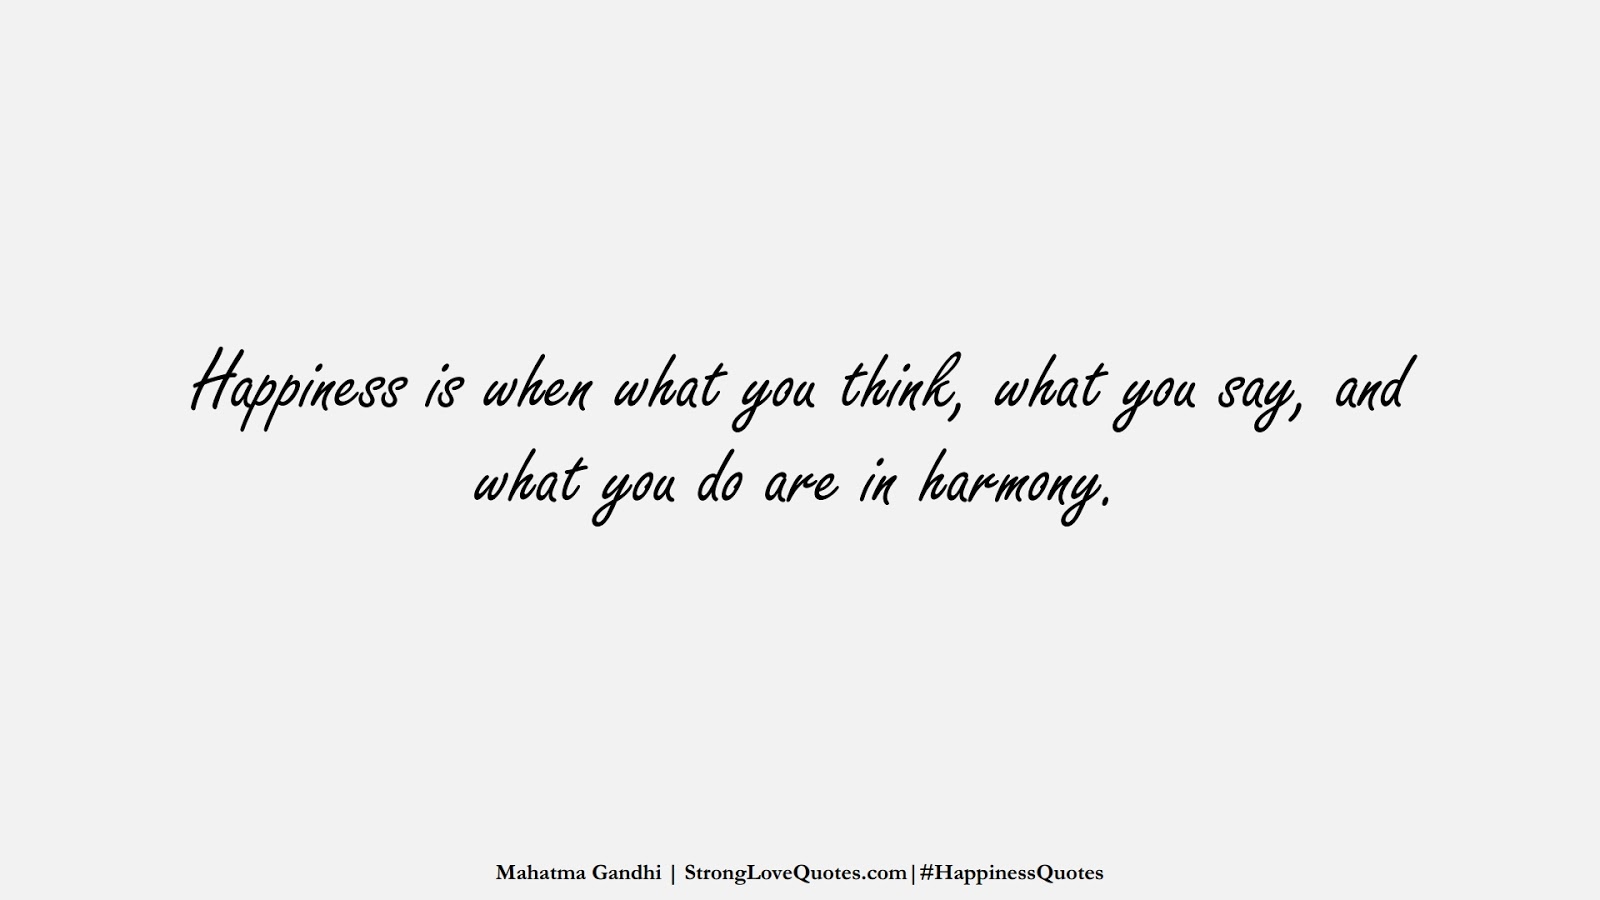 Happiness is when what you think, what you say, and what you do are in harmony. (Mahatma Gandhi);  #HappinessQuotes